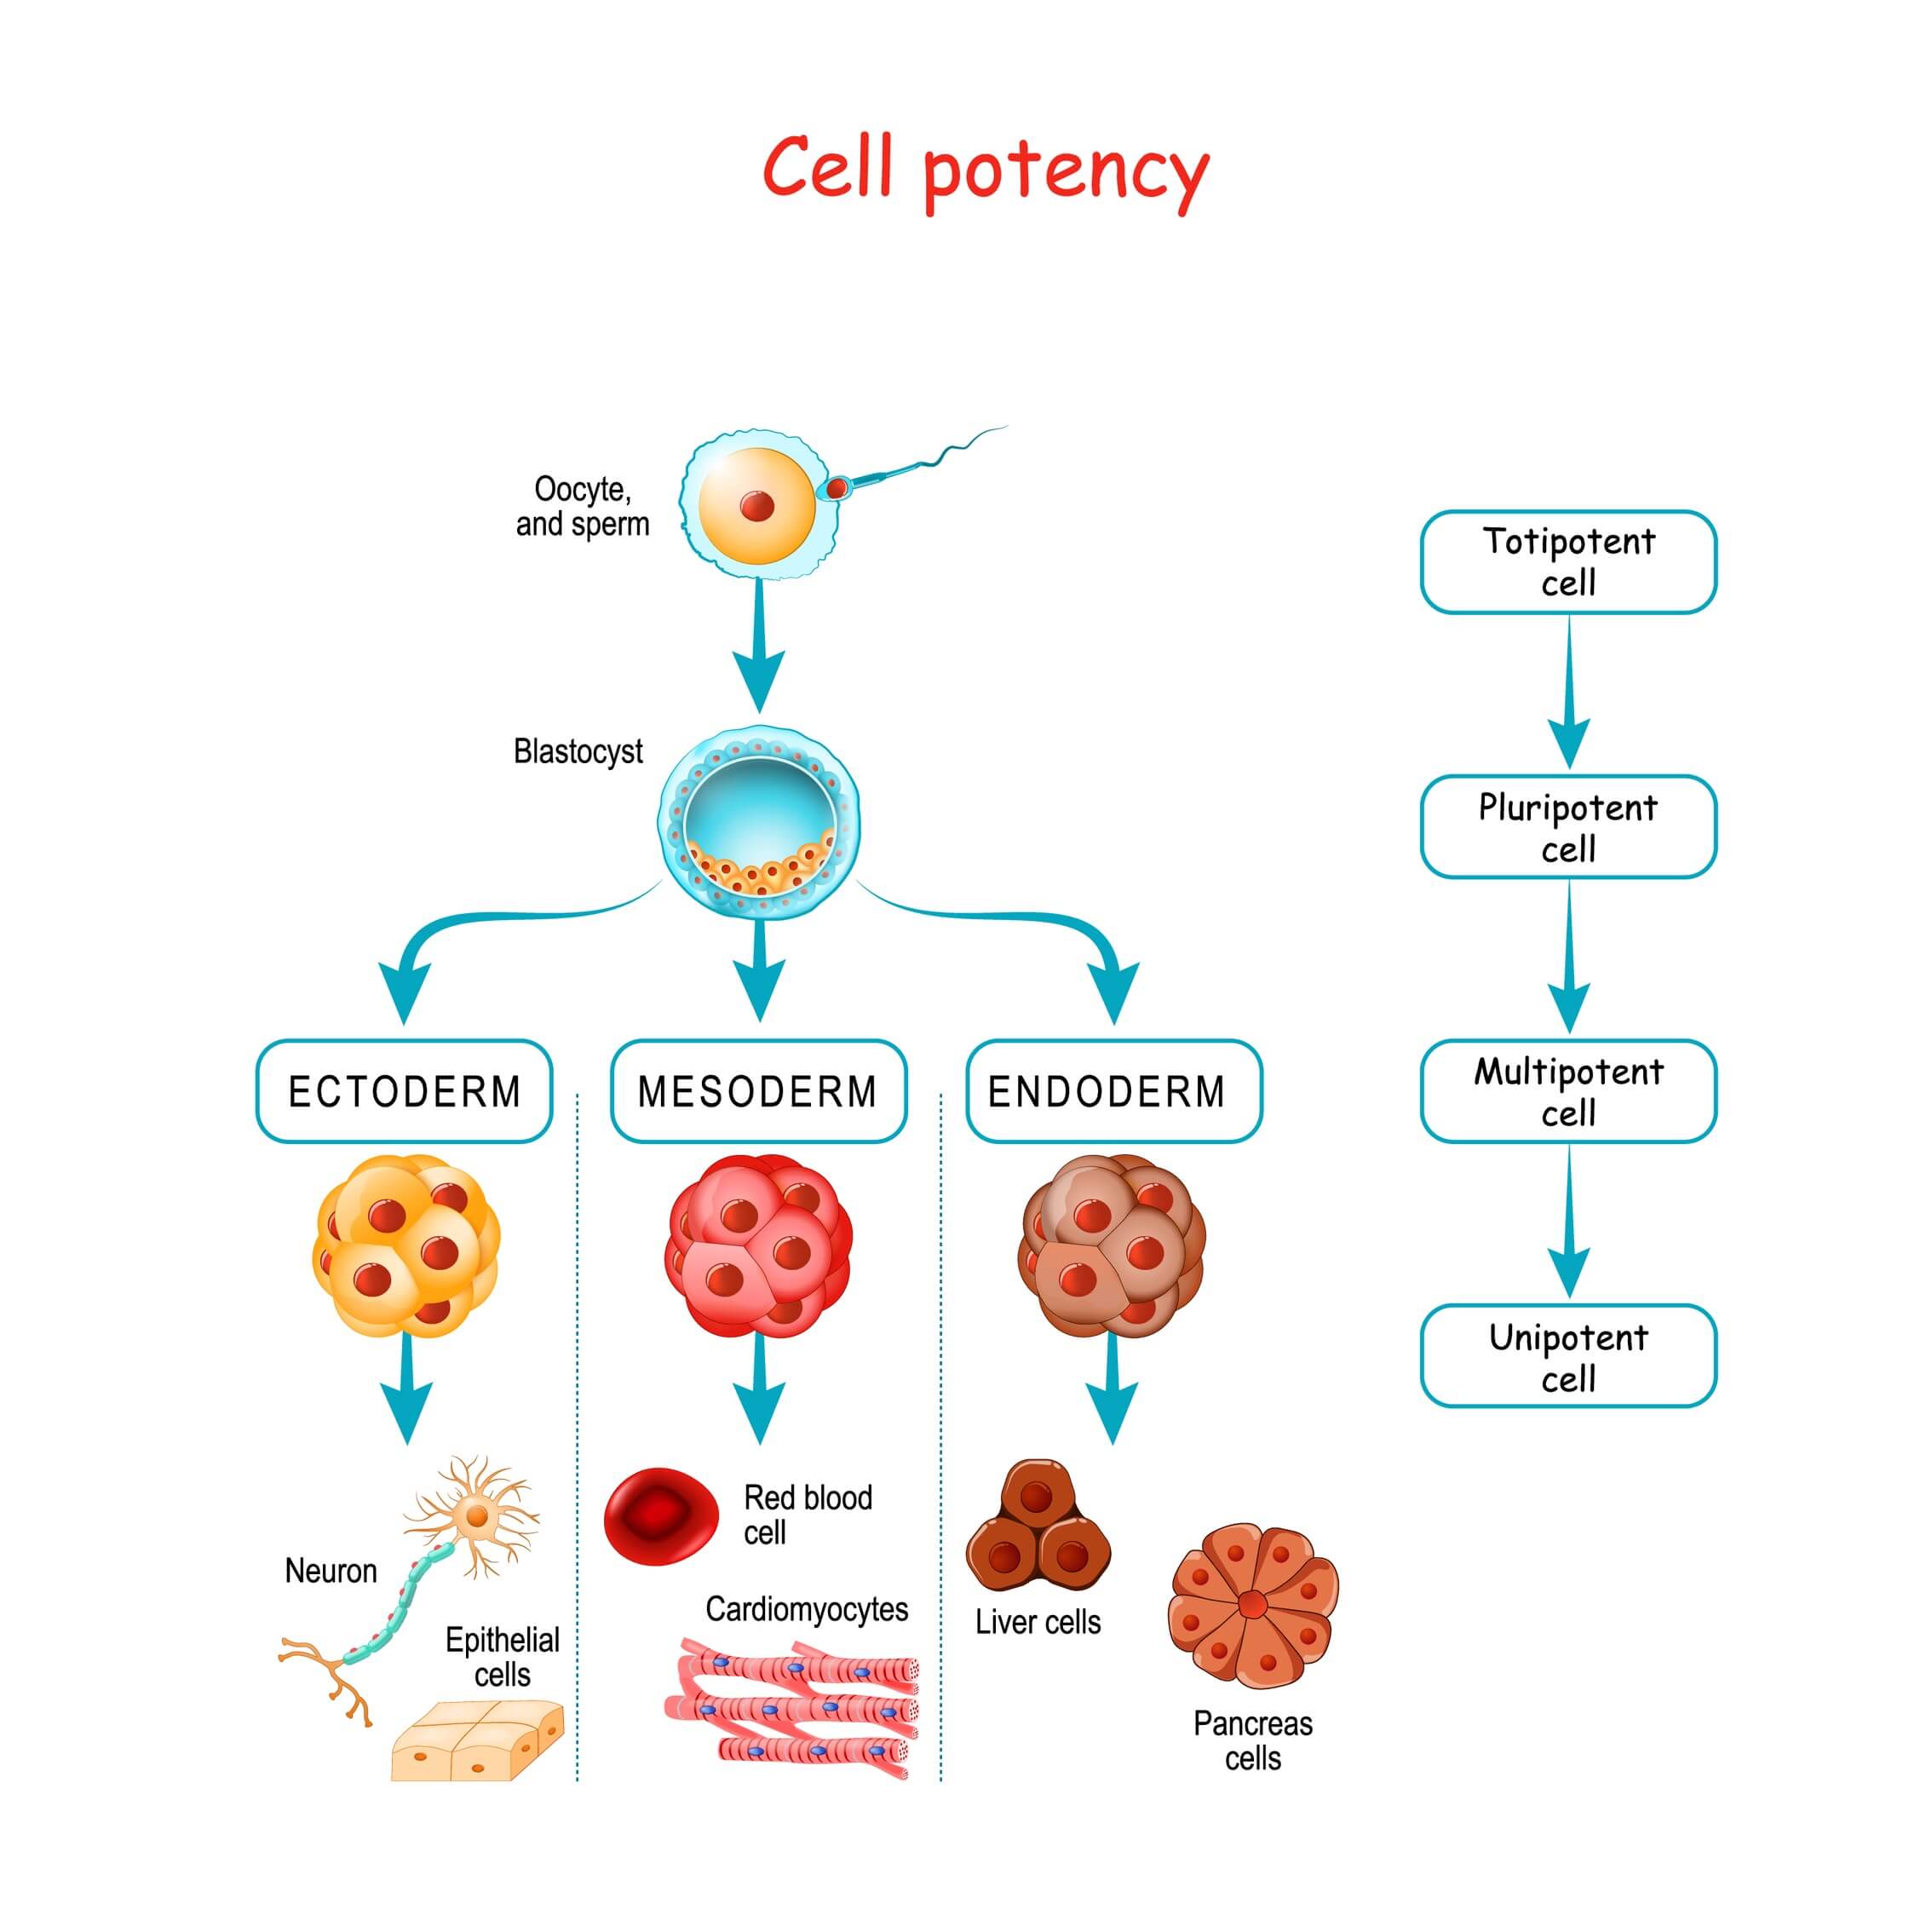 are embryonic stem cells totipotent